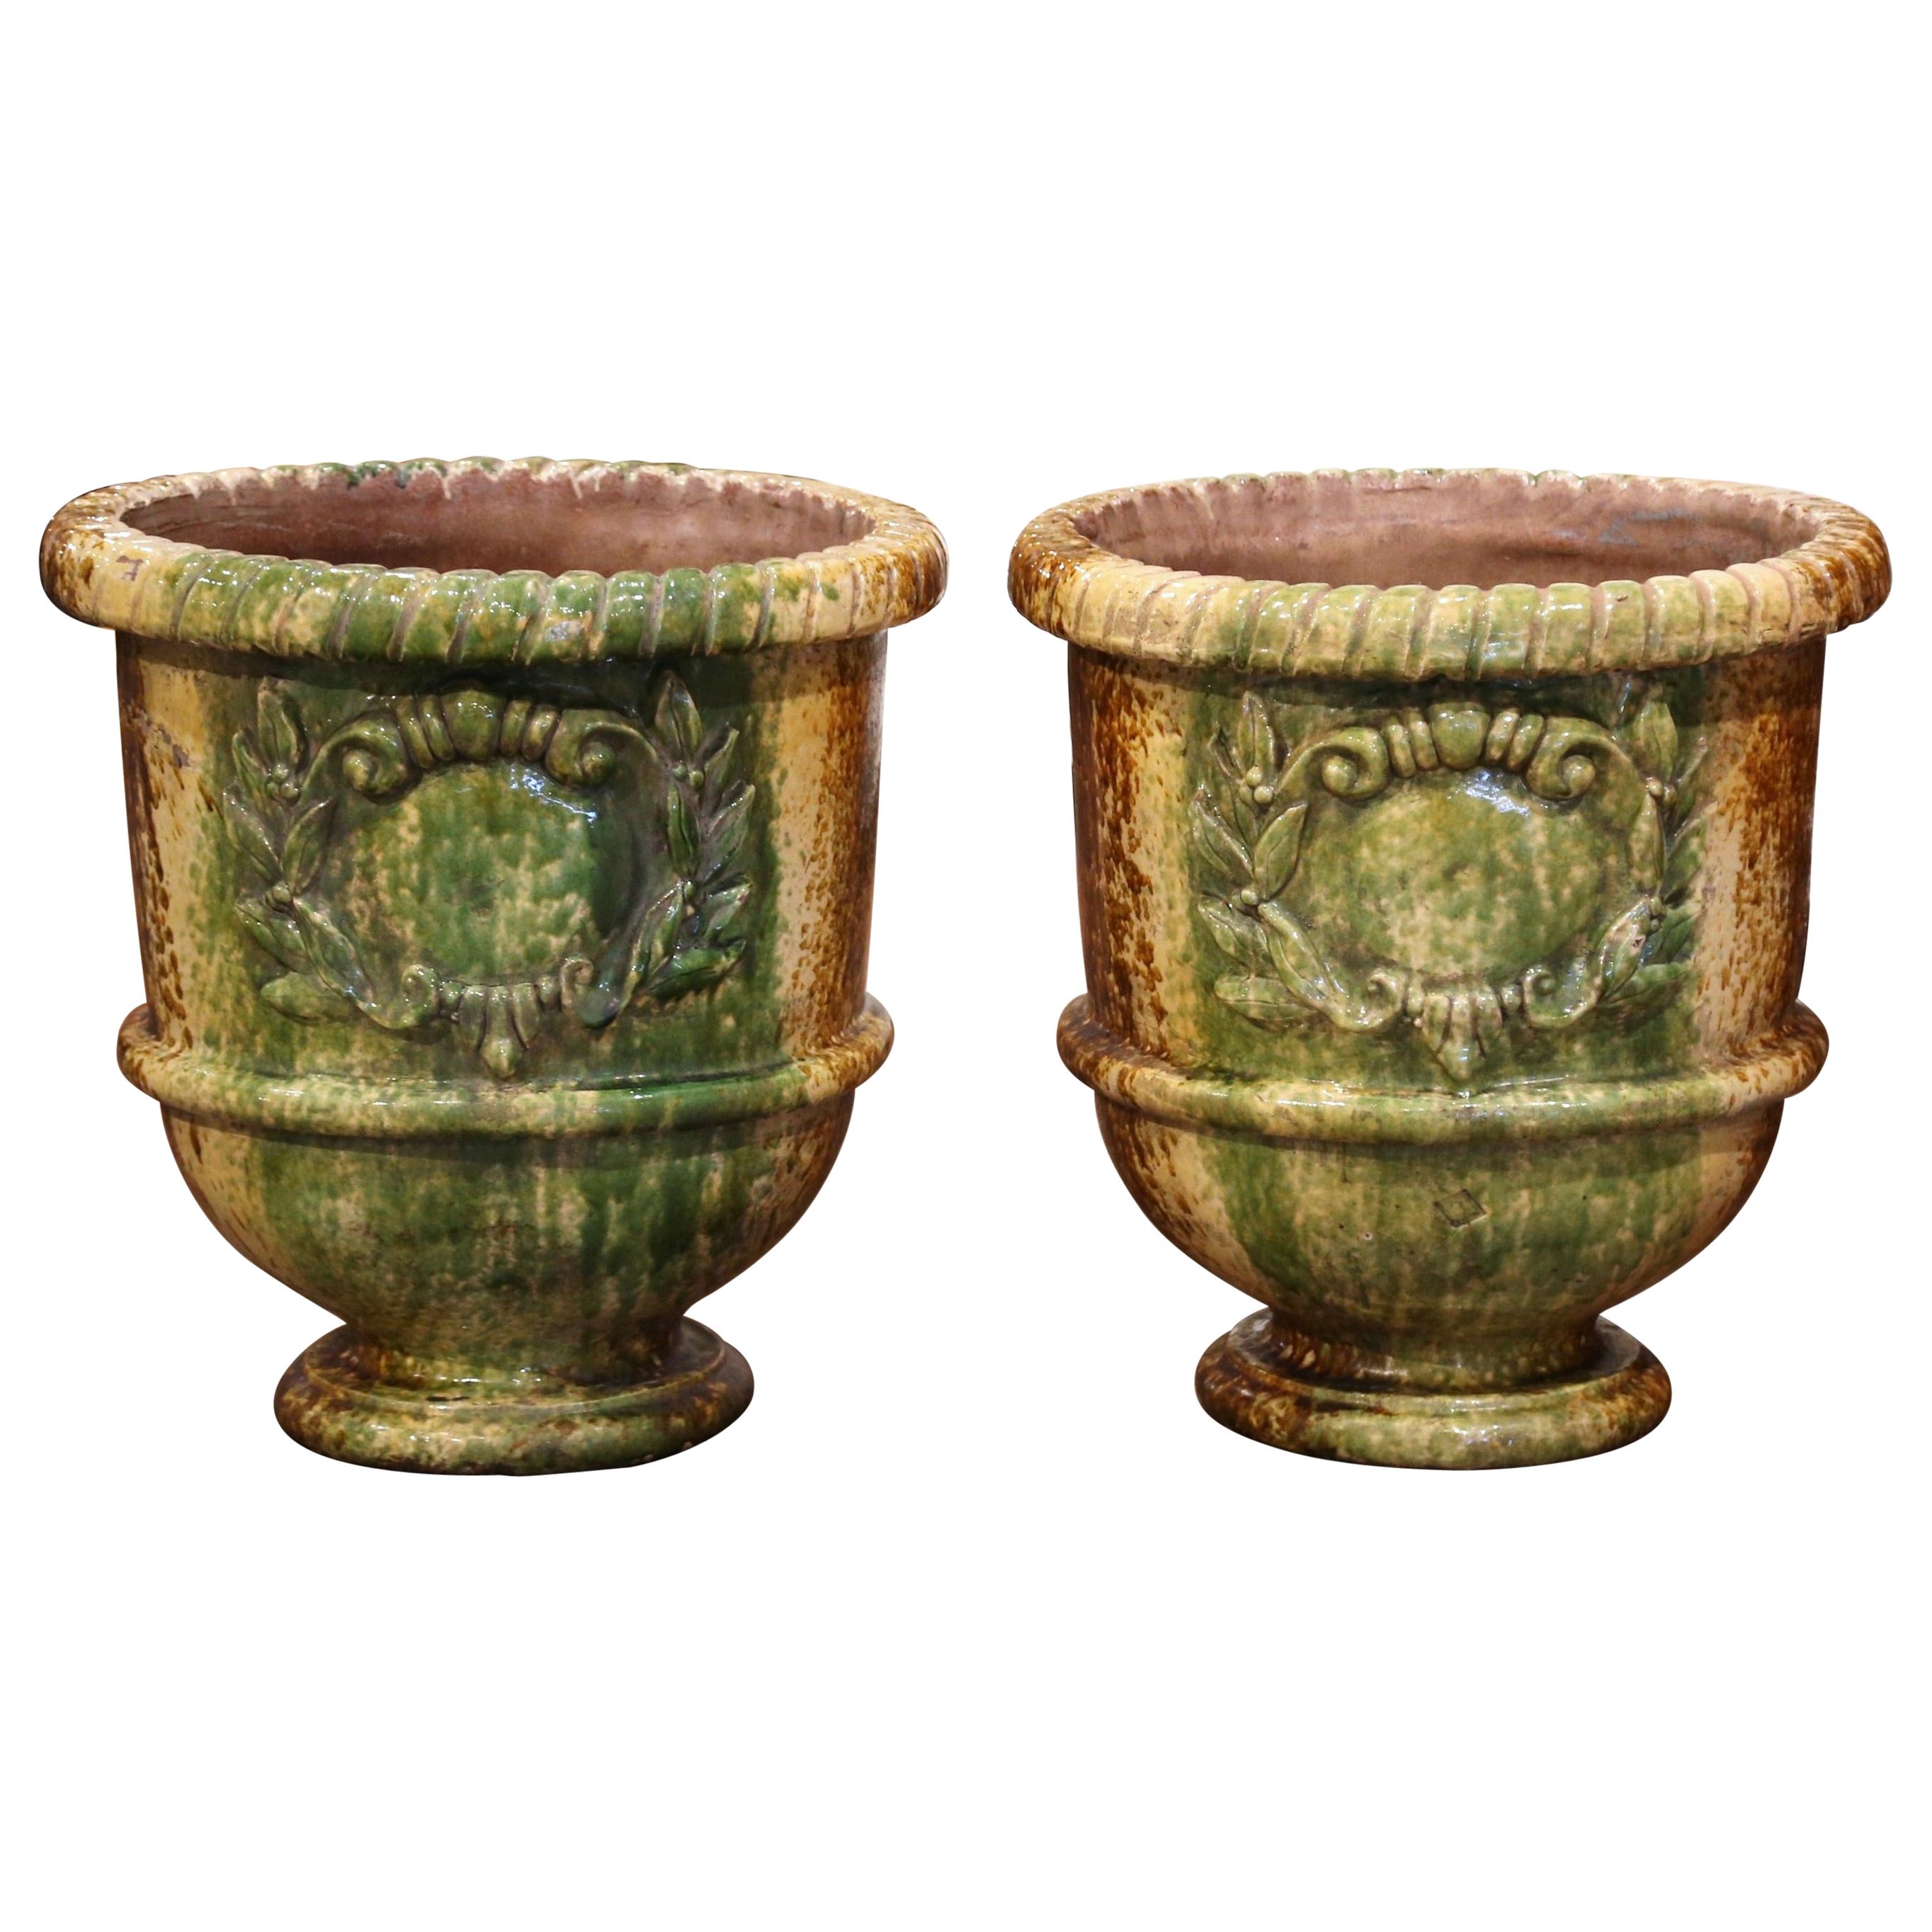 Pair of 20th Century French Glazed Terracotta Green Planters from Provence